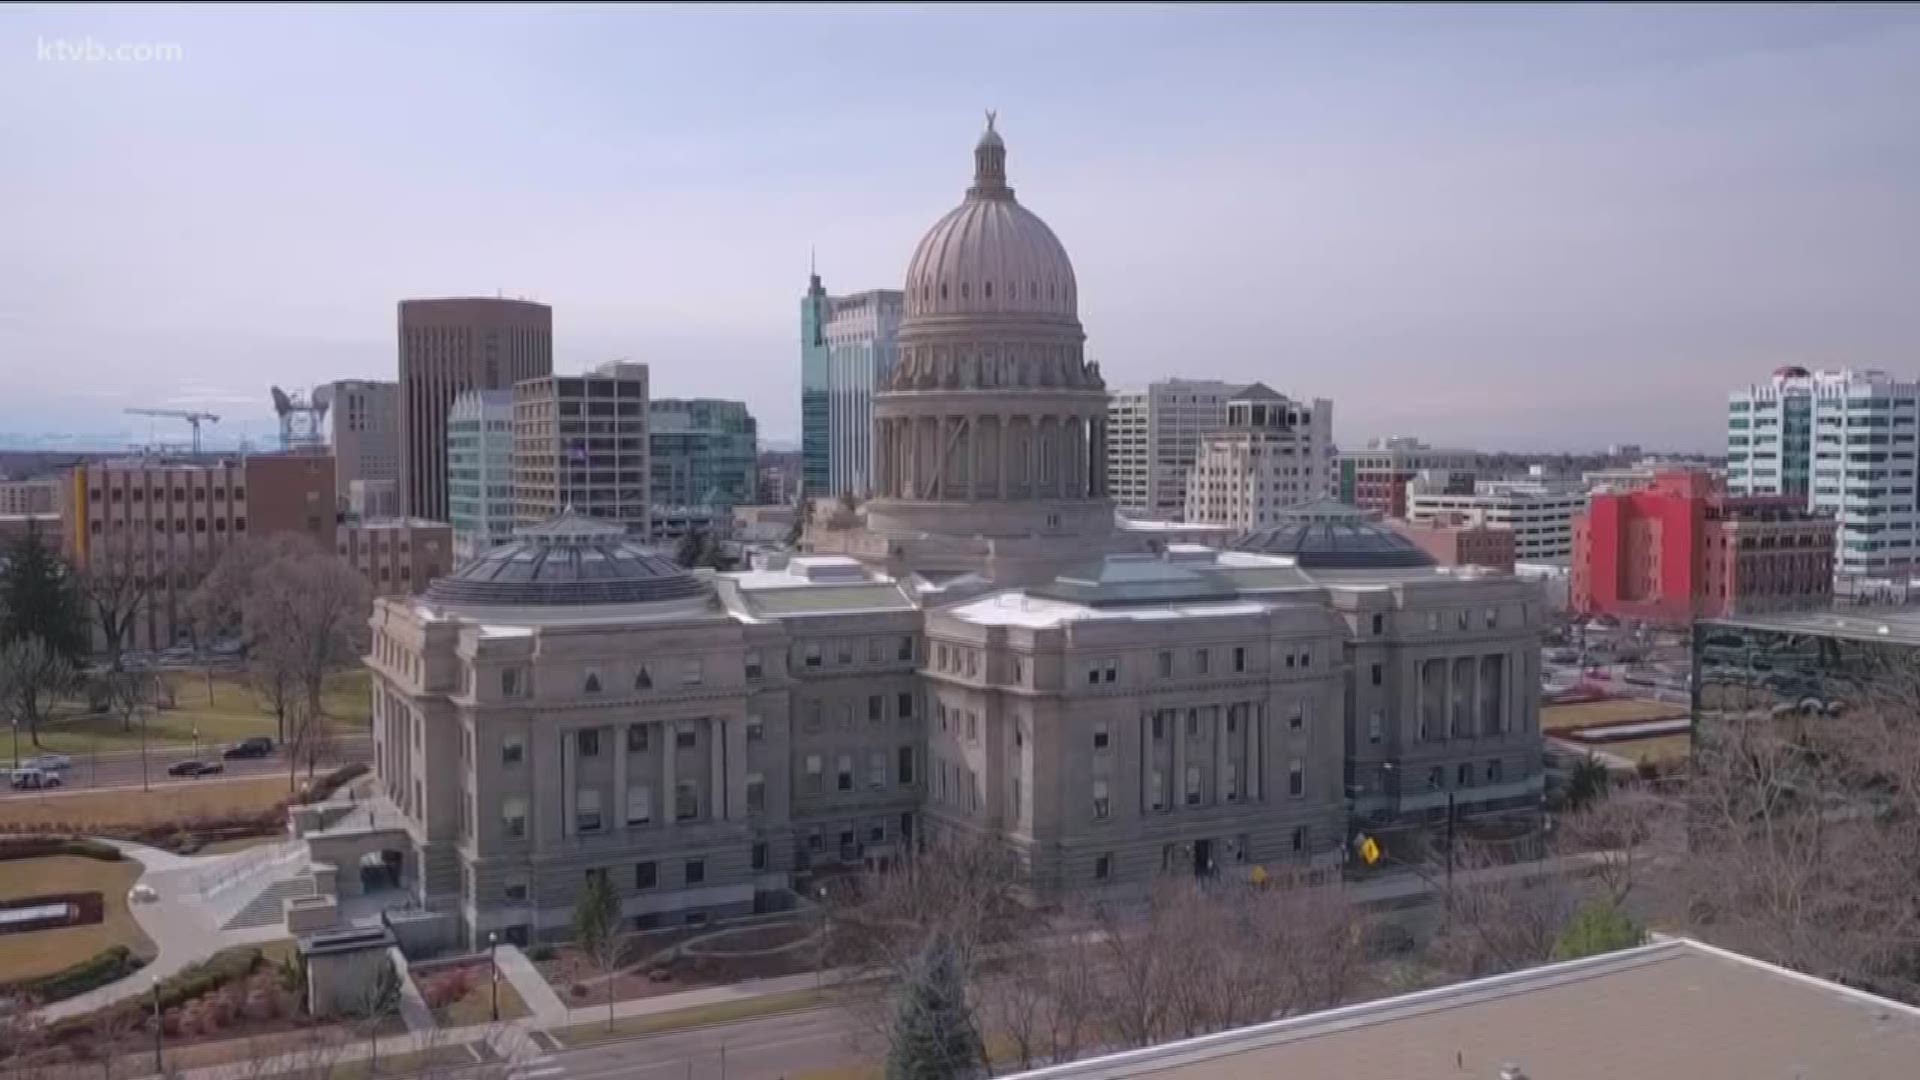 Study finds lower income Idahoans paying higher tax rates than those with higher incomes.